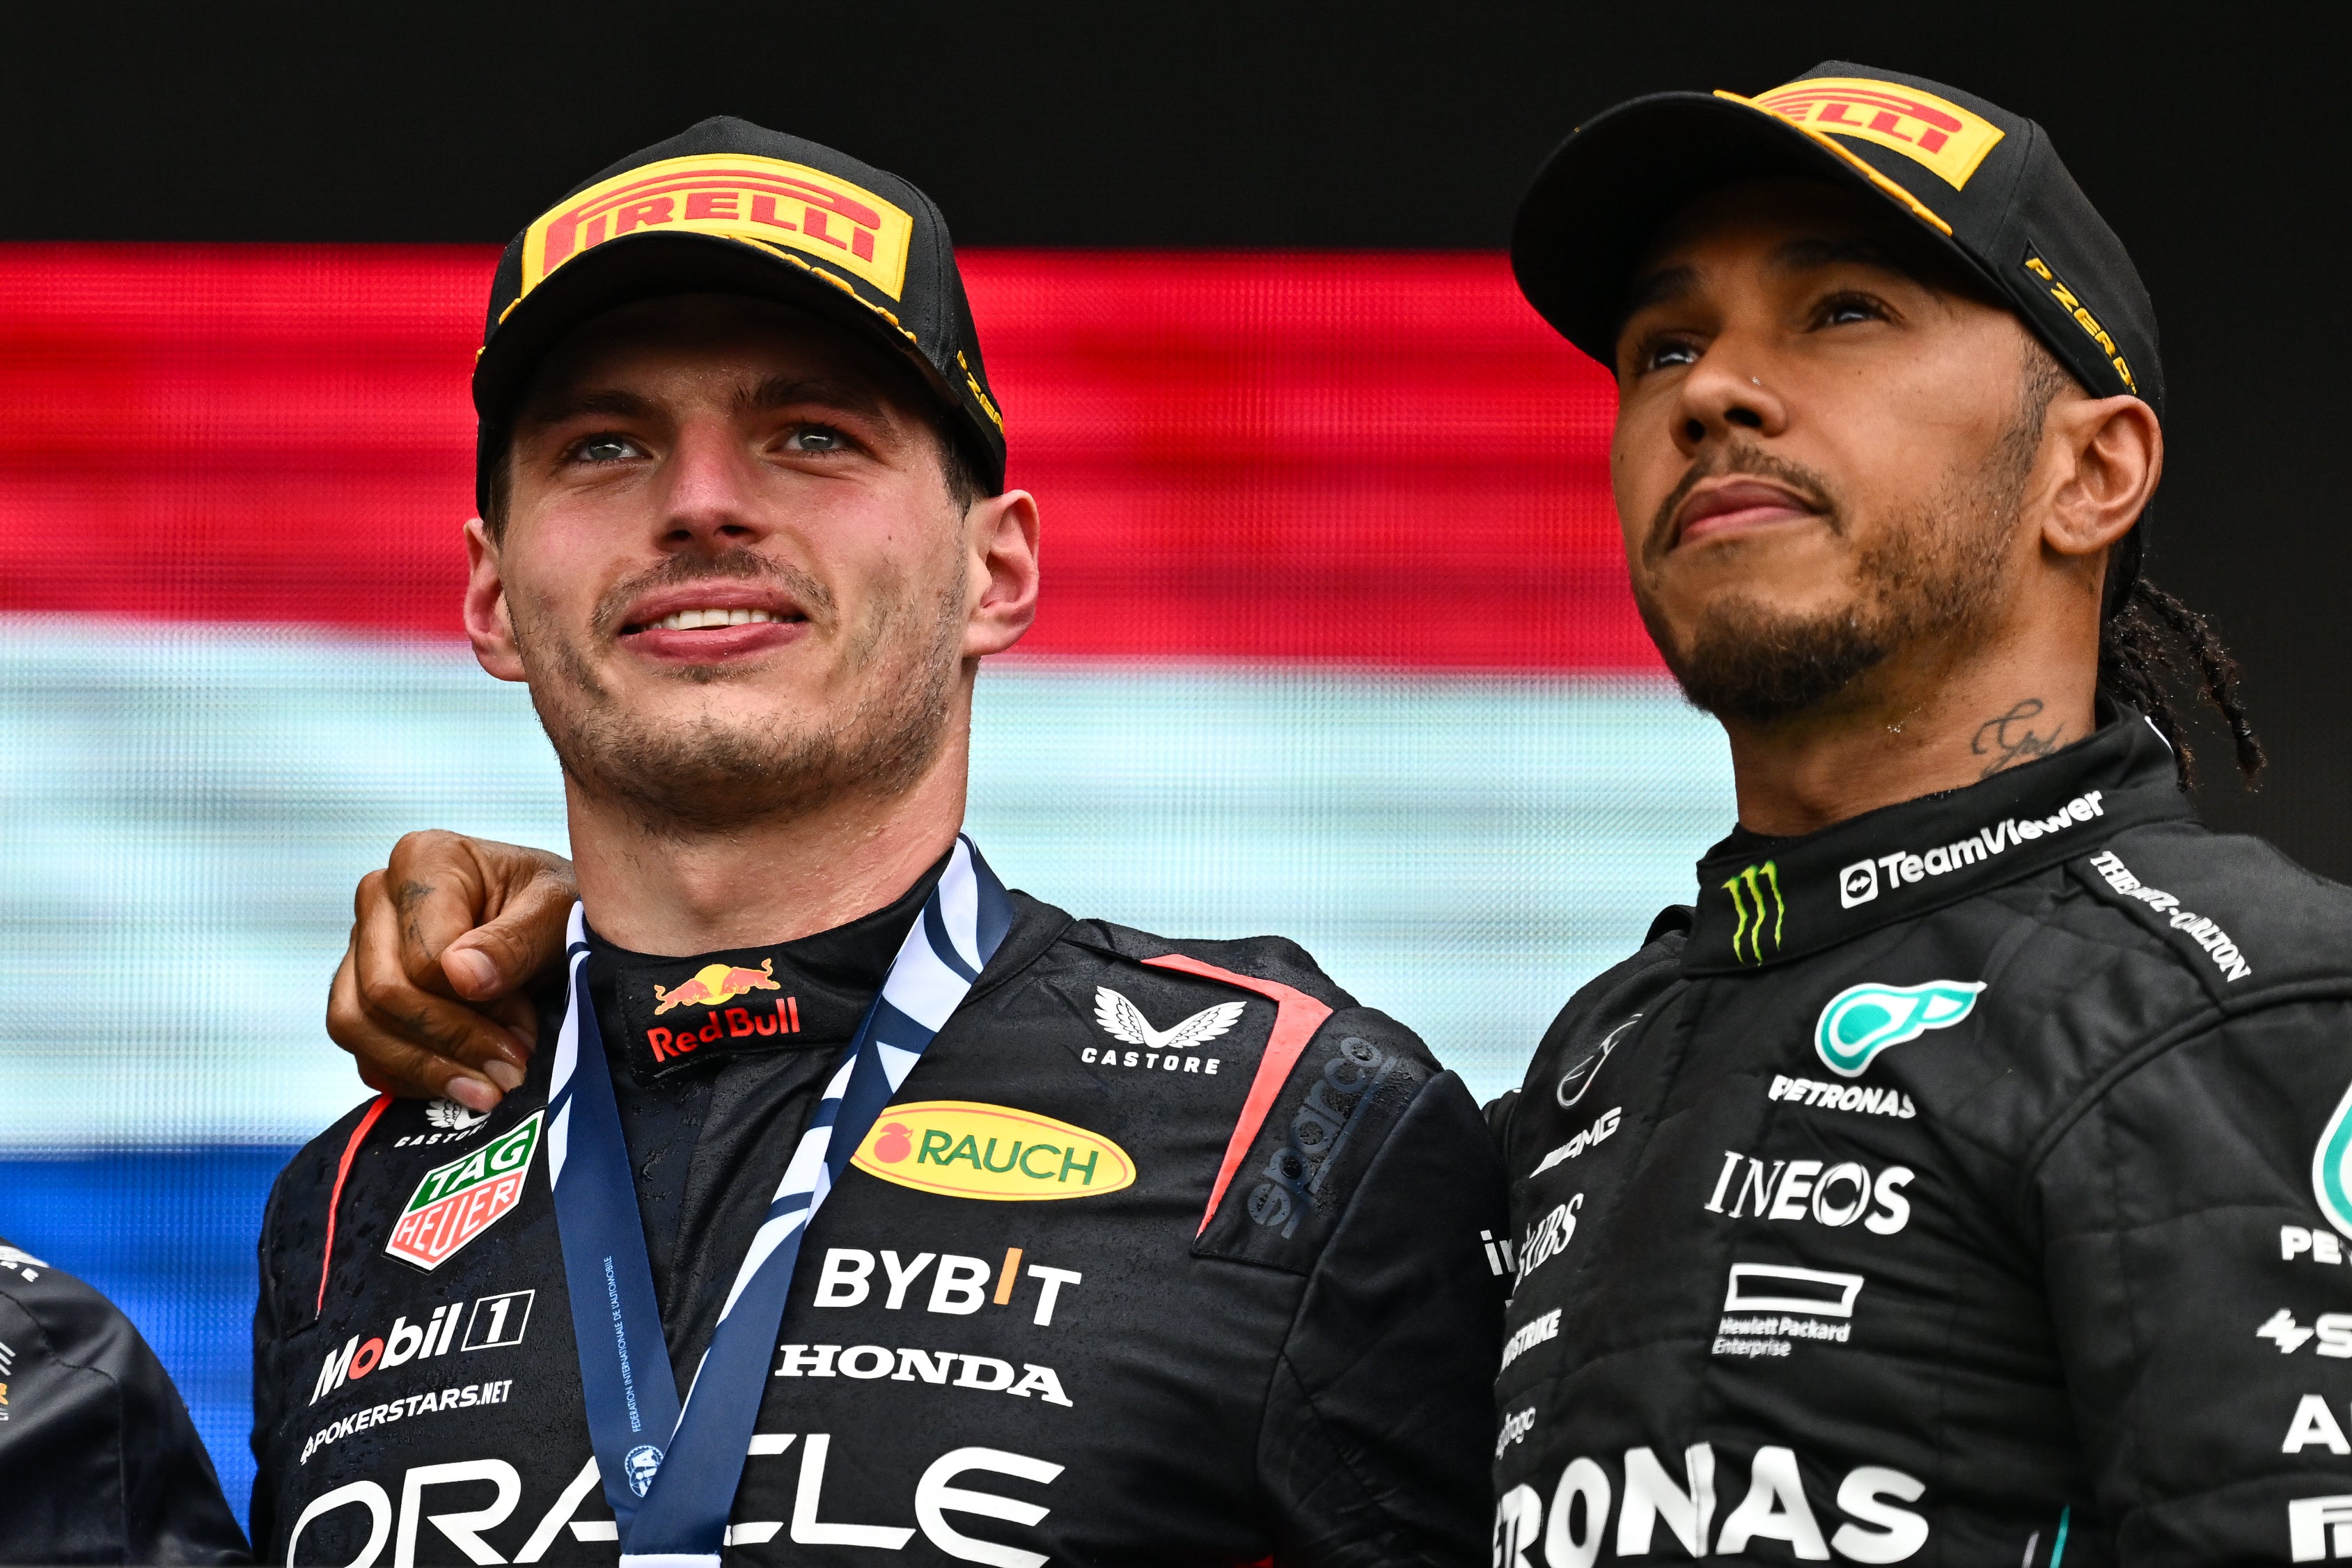 Lewis Hamilton made contact about the prospect of being Max Verstappen’s team-mate at Red Bull